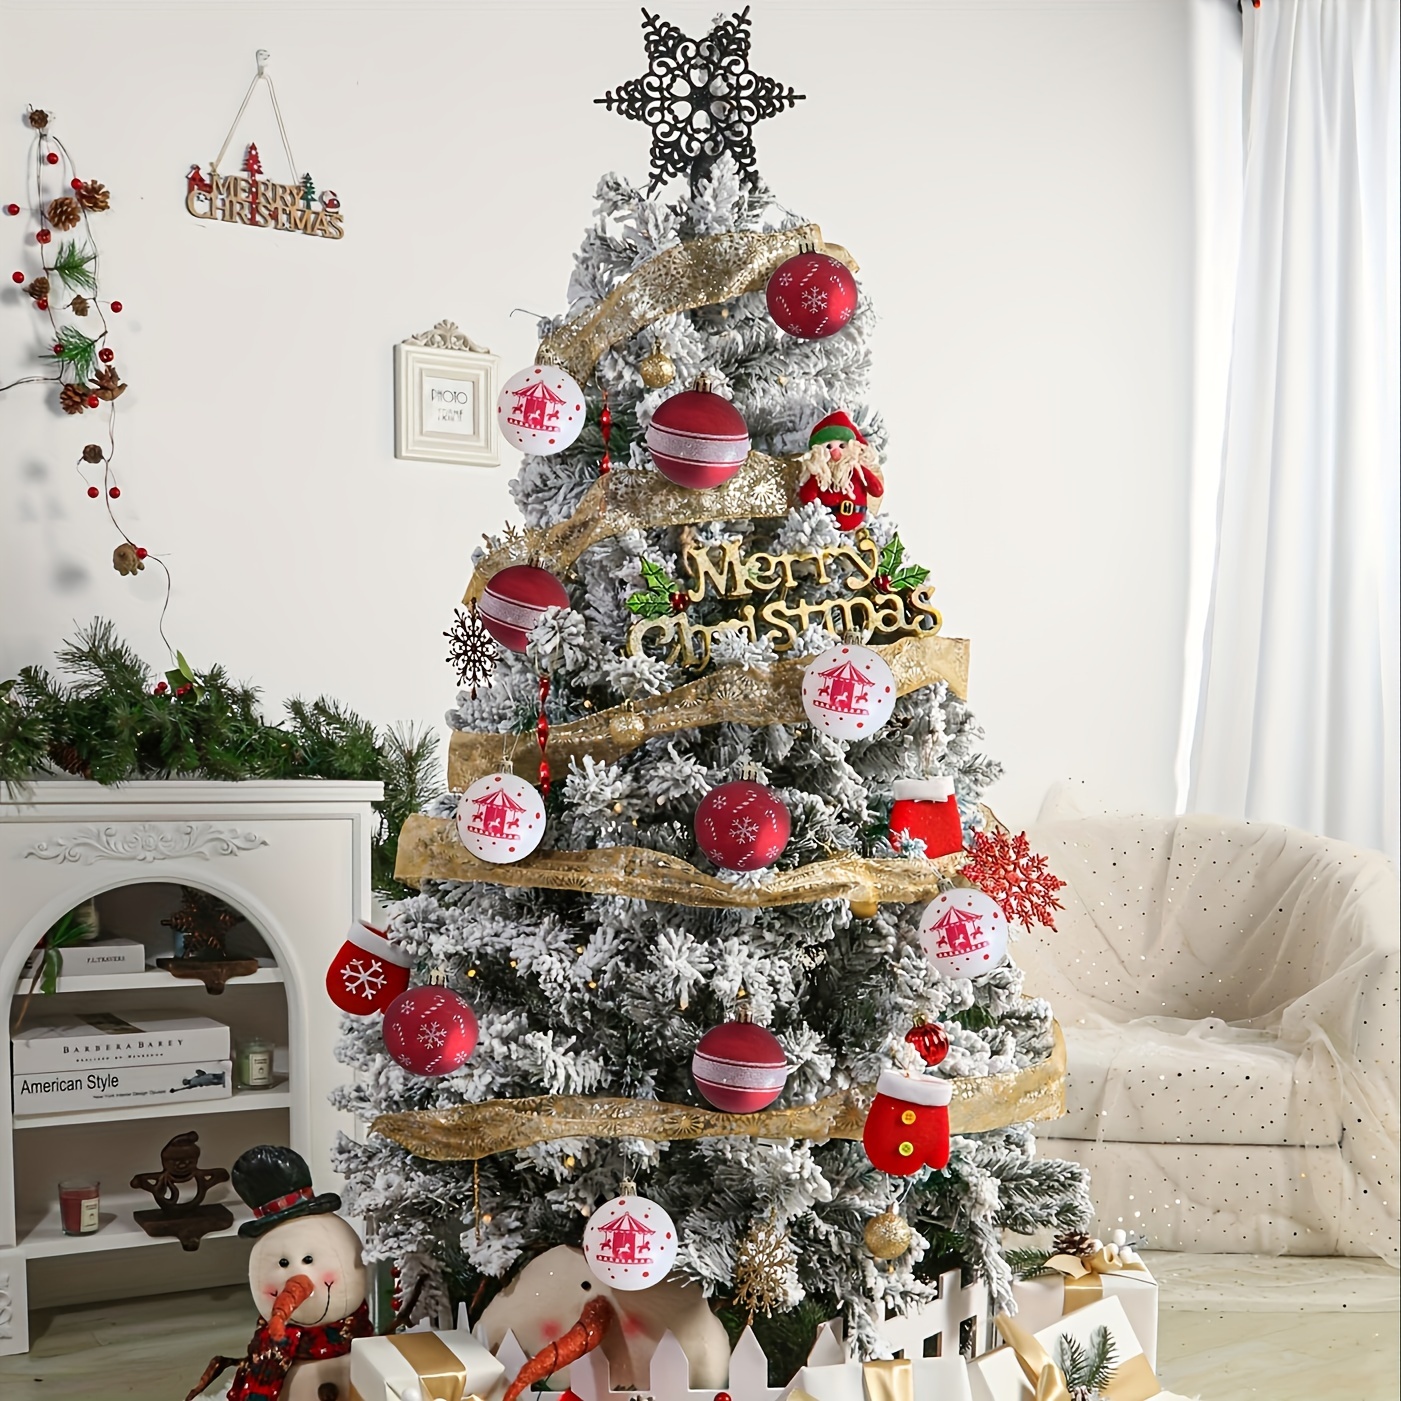 Red And White Flocked Christmas Tree